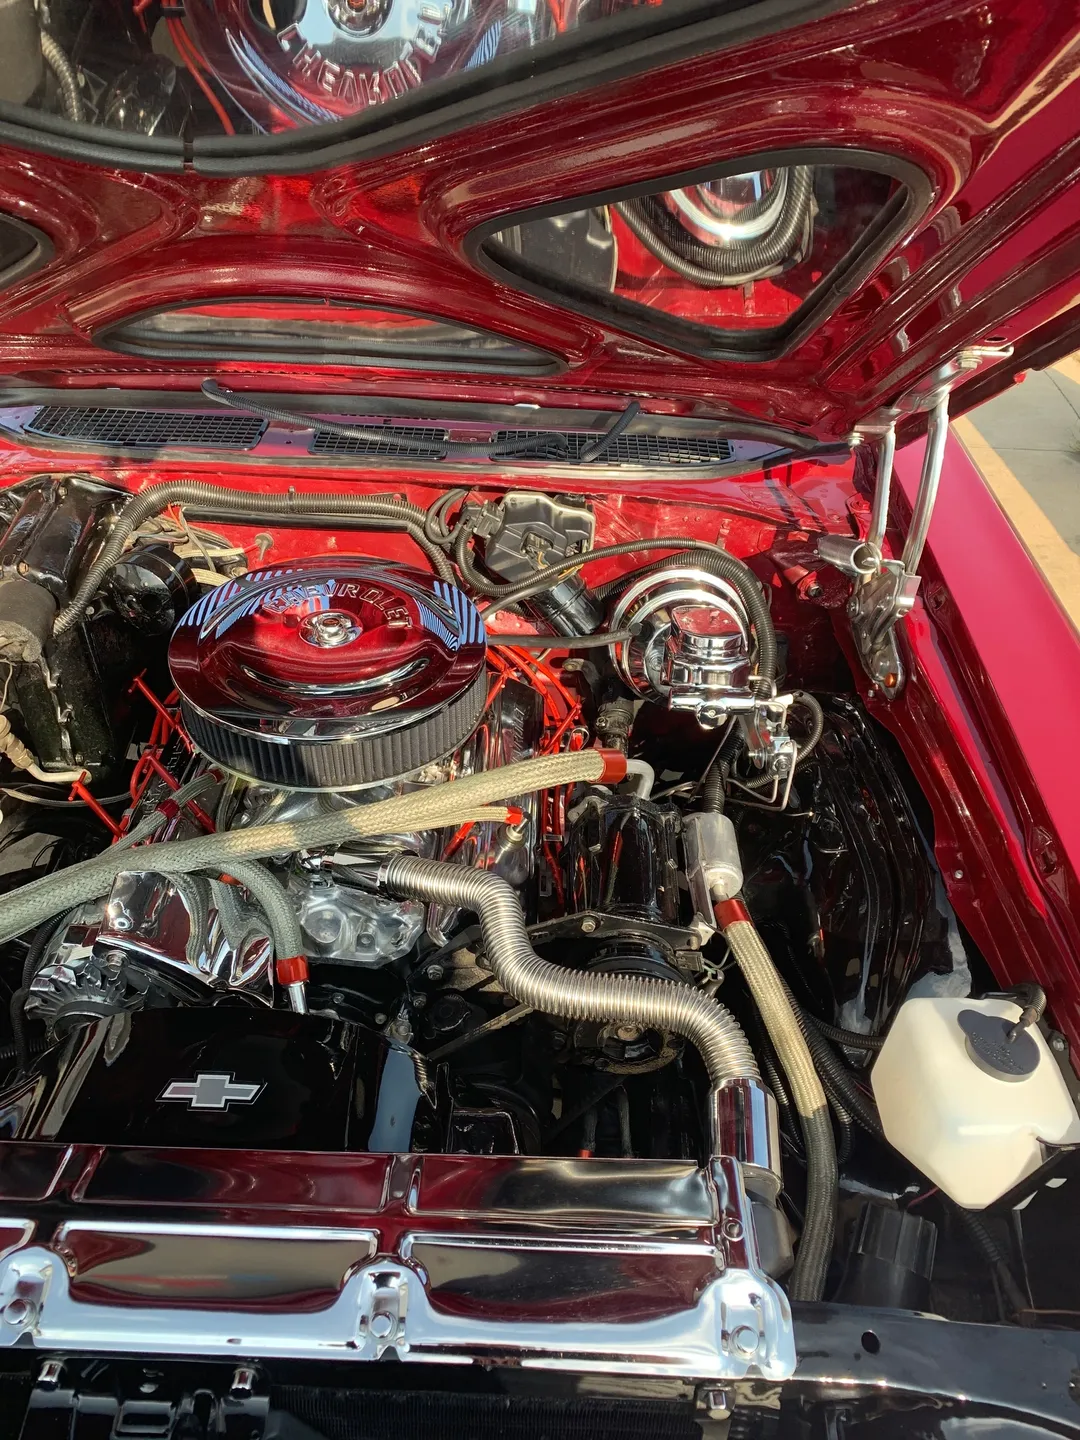 The inside of a hood of the red vintage car